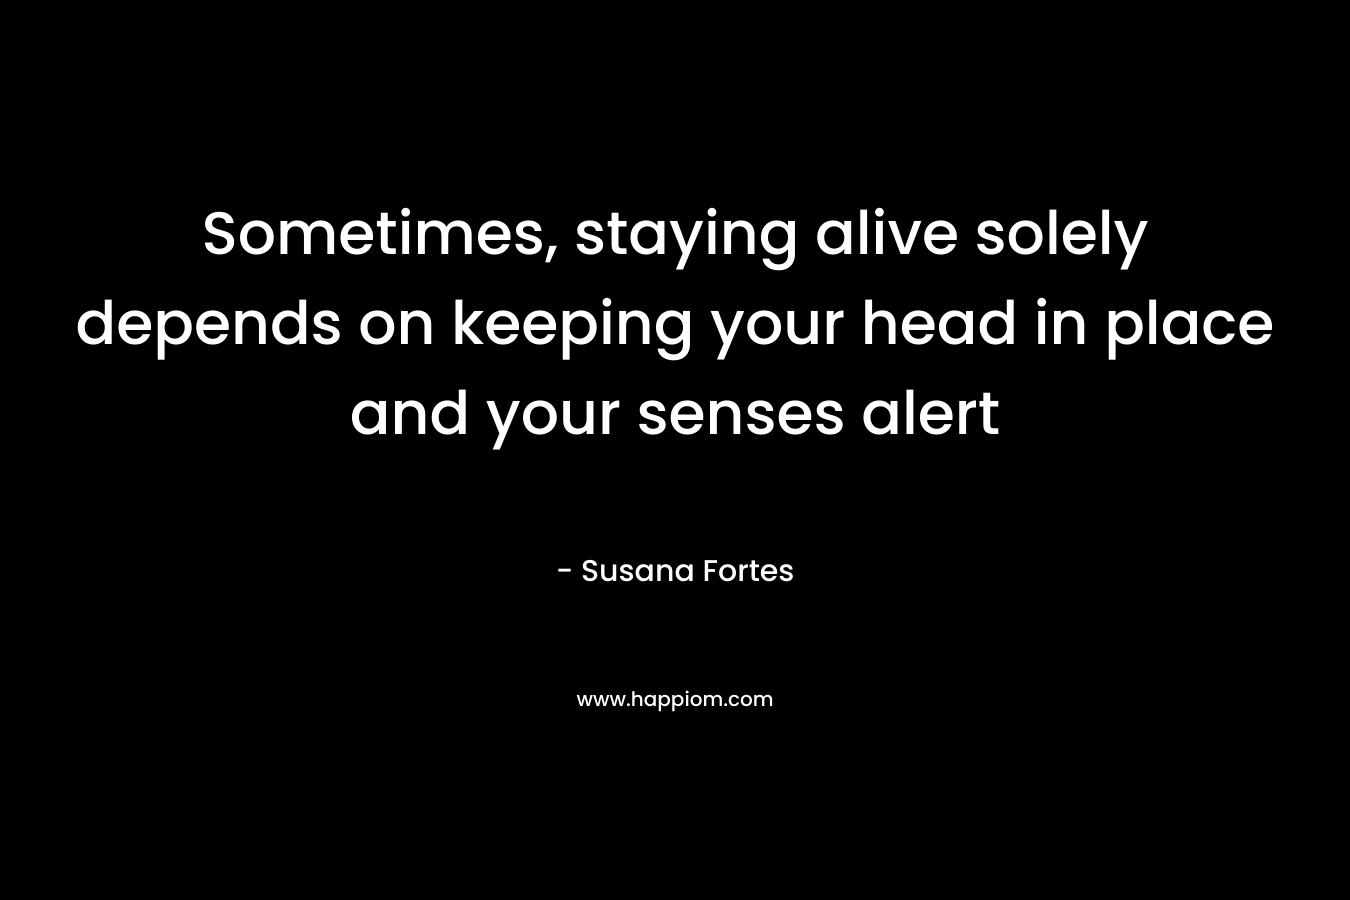 Sometimes, staying alive solely depends on keeping your head in place and your senses alert